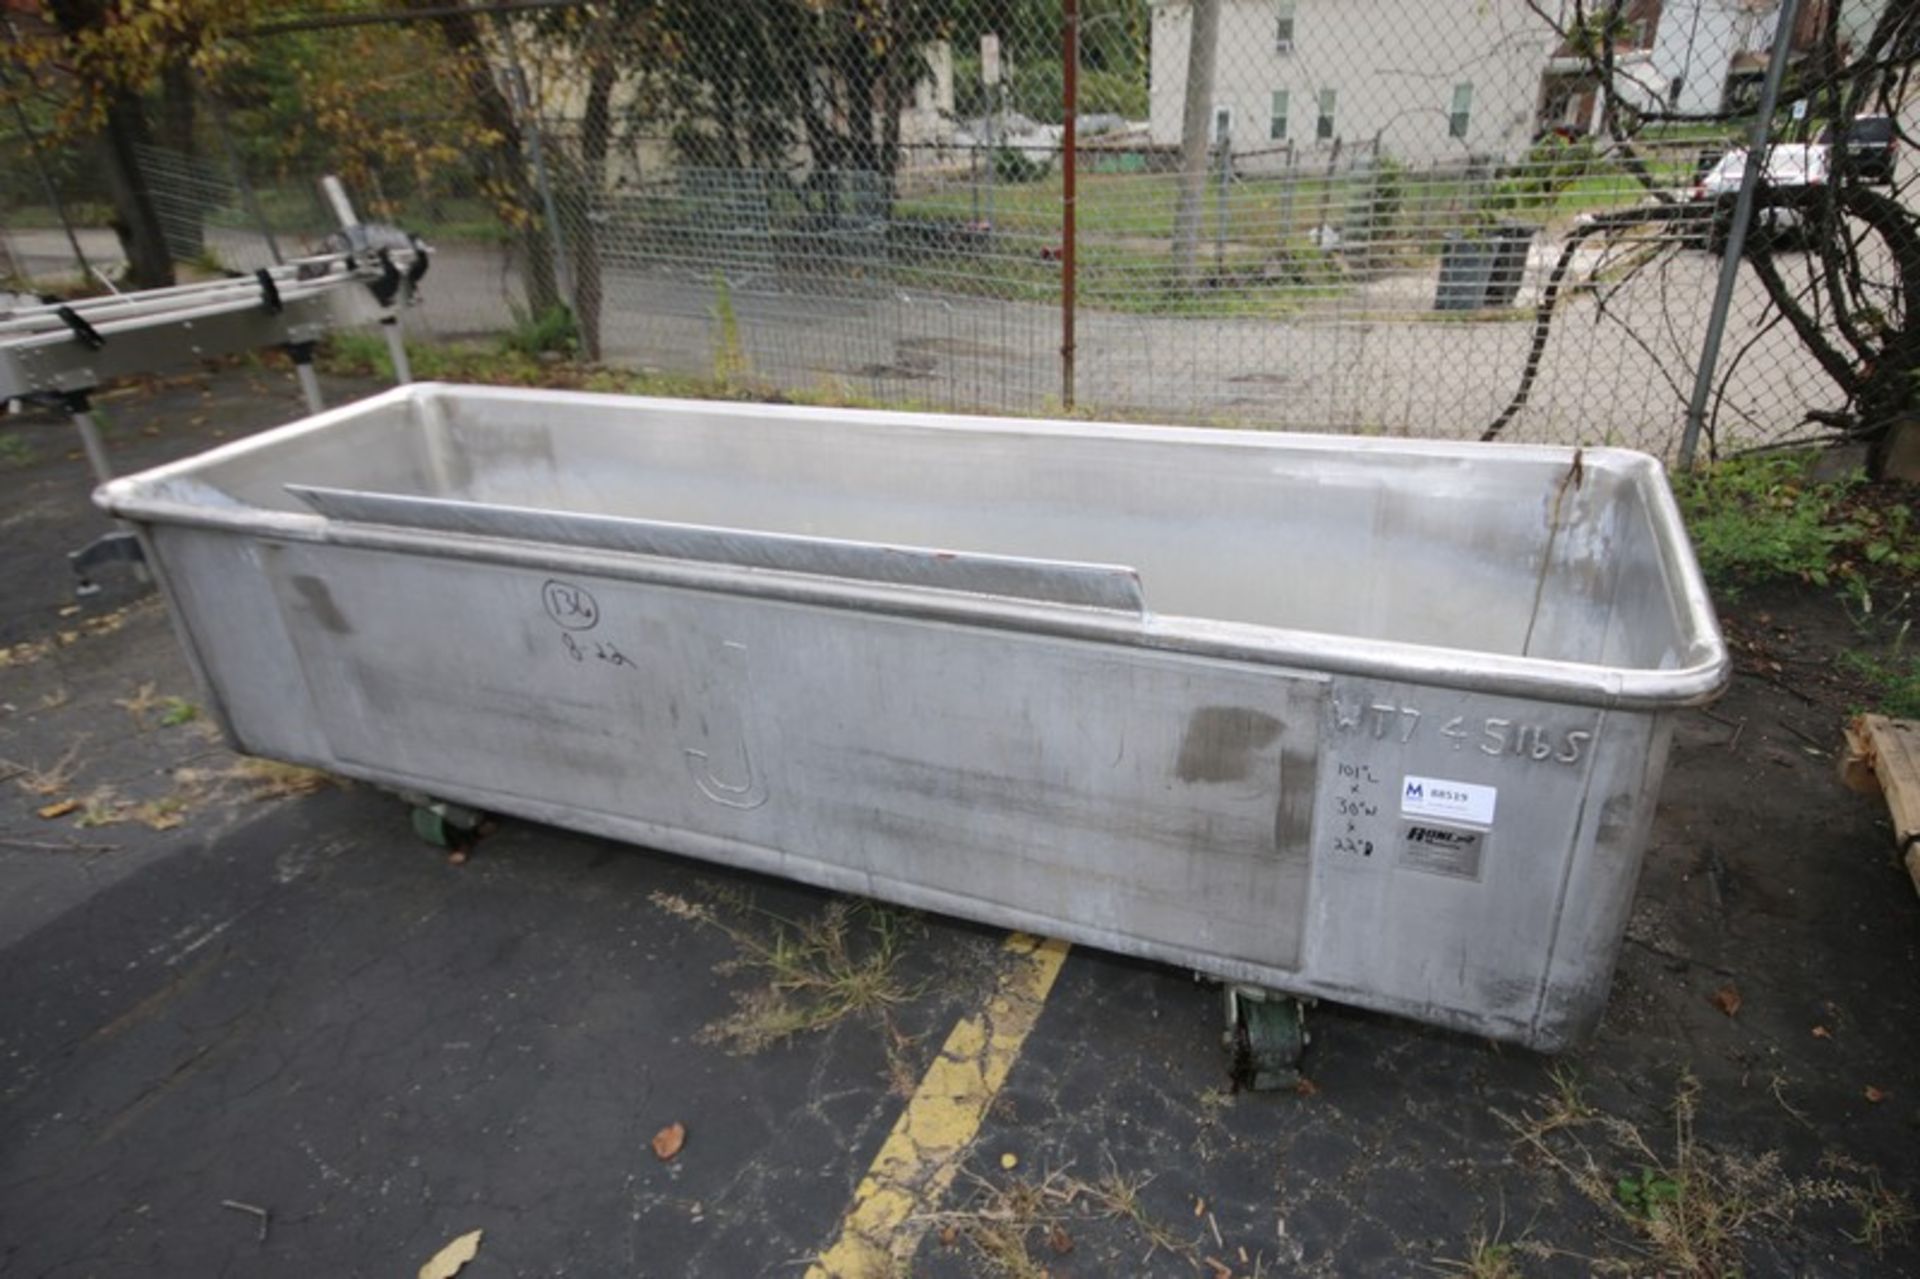 A-One Manufacturing, 101" L x 30" W x 22" D, Portable S/S Trough, Model 22-DT-001, SN 25967-1 (INV#